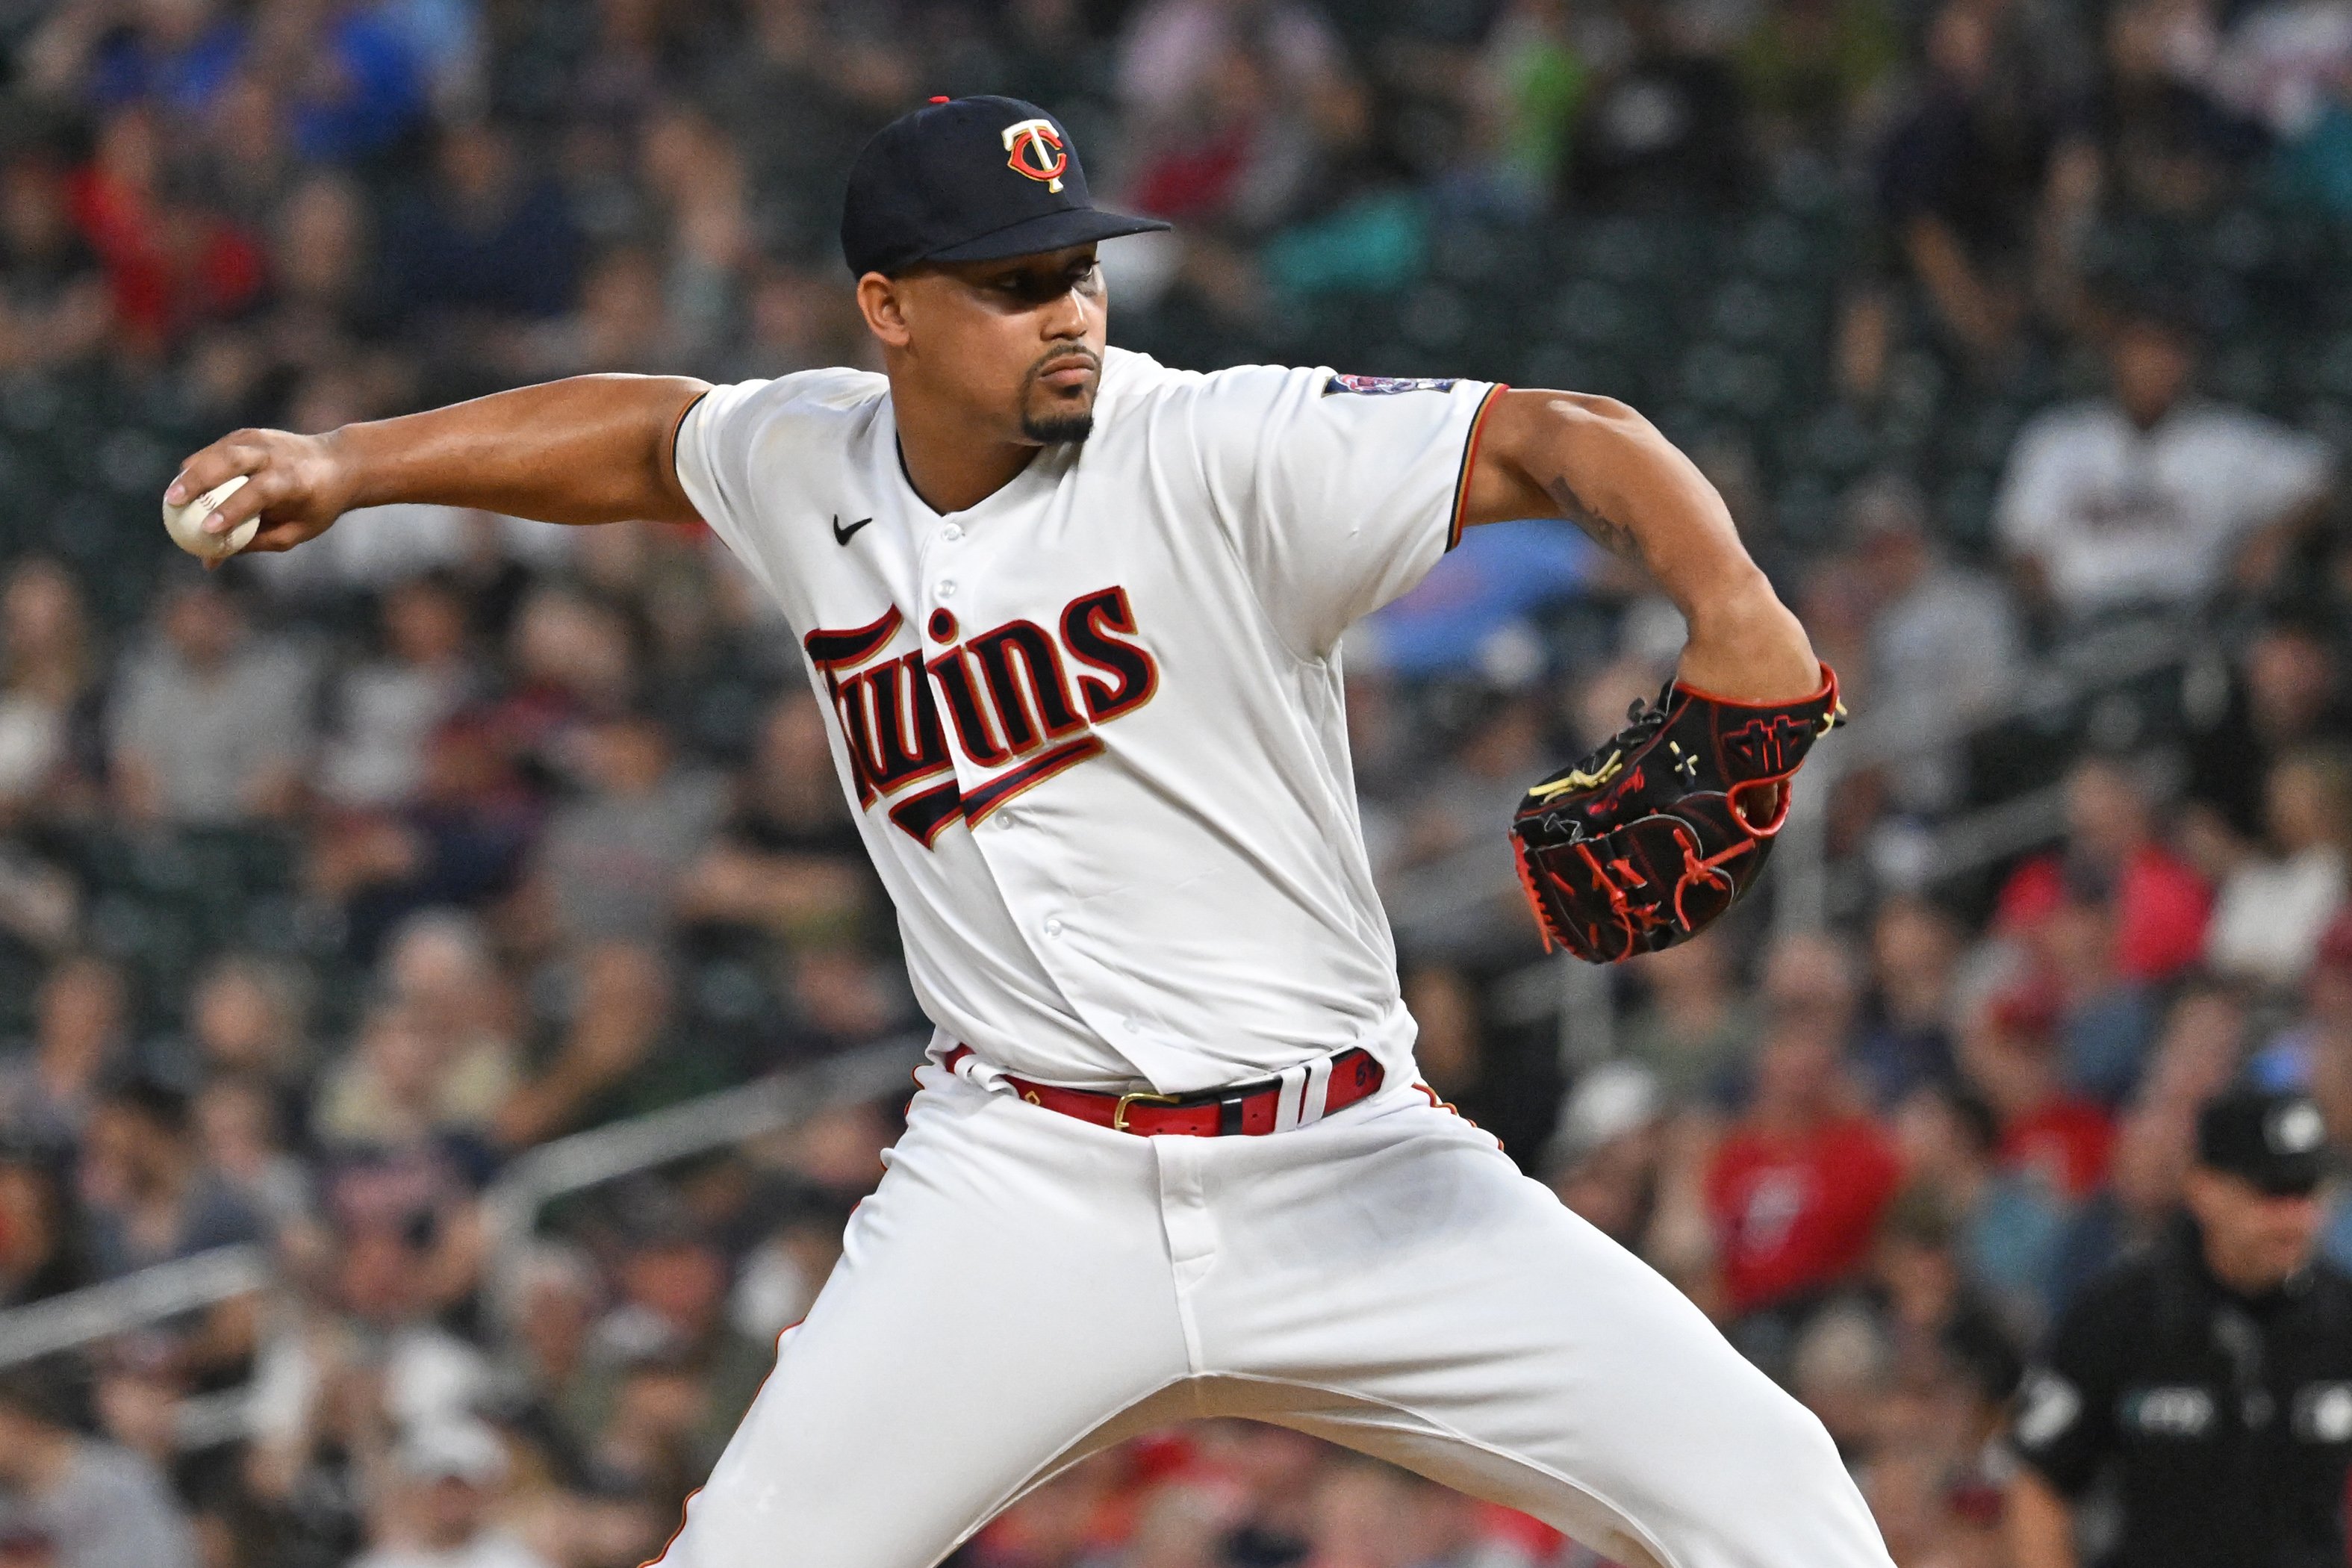 The Twins' Jhoan Duran and his 'splinker' pitch are fast becoming